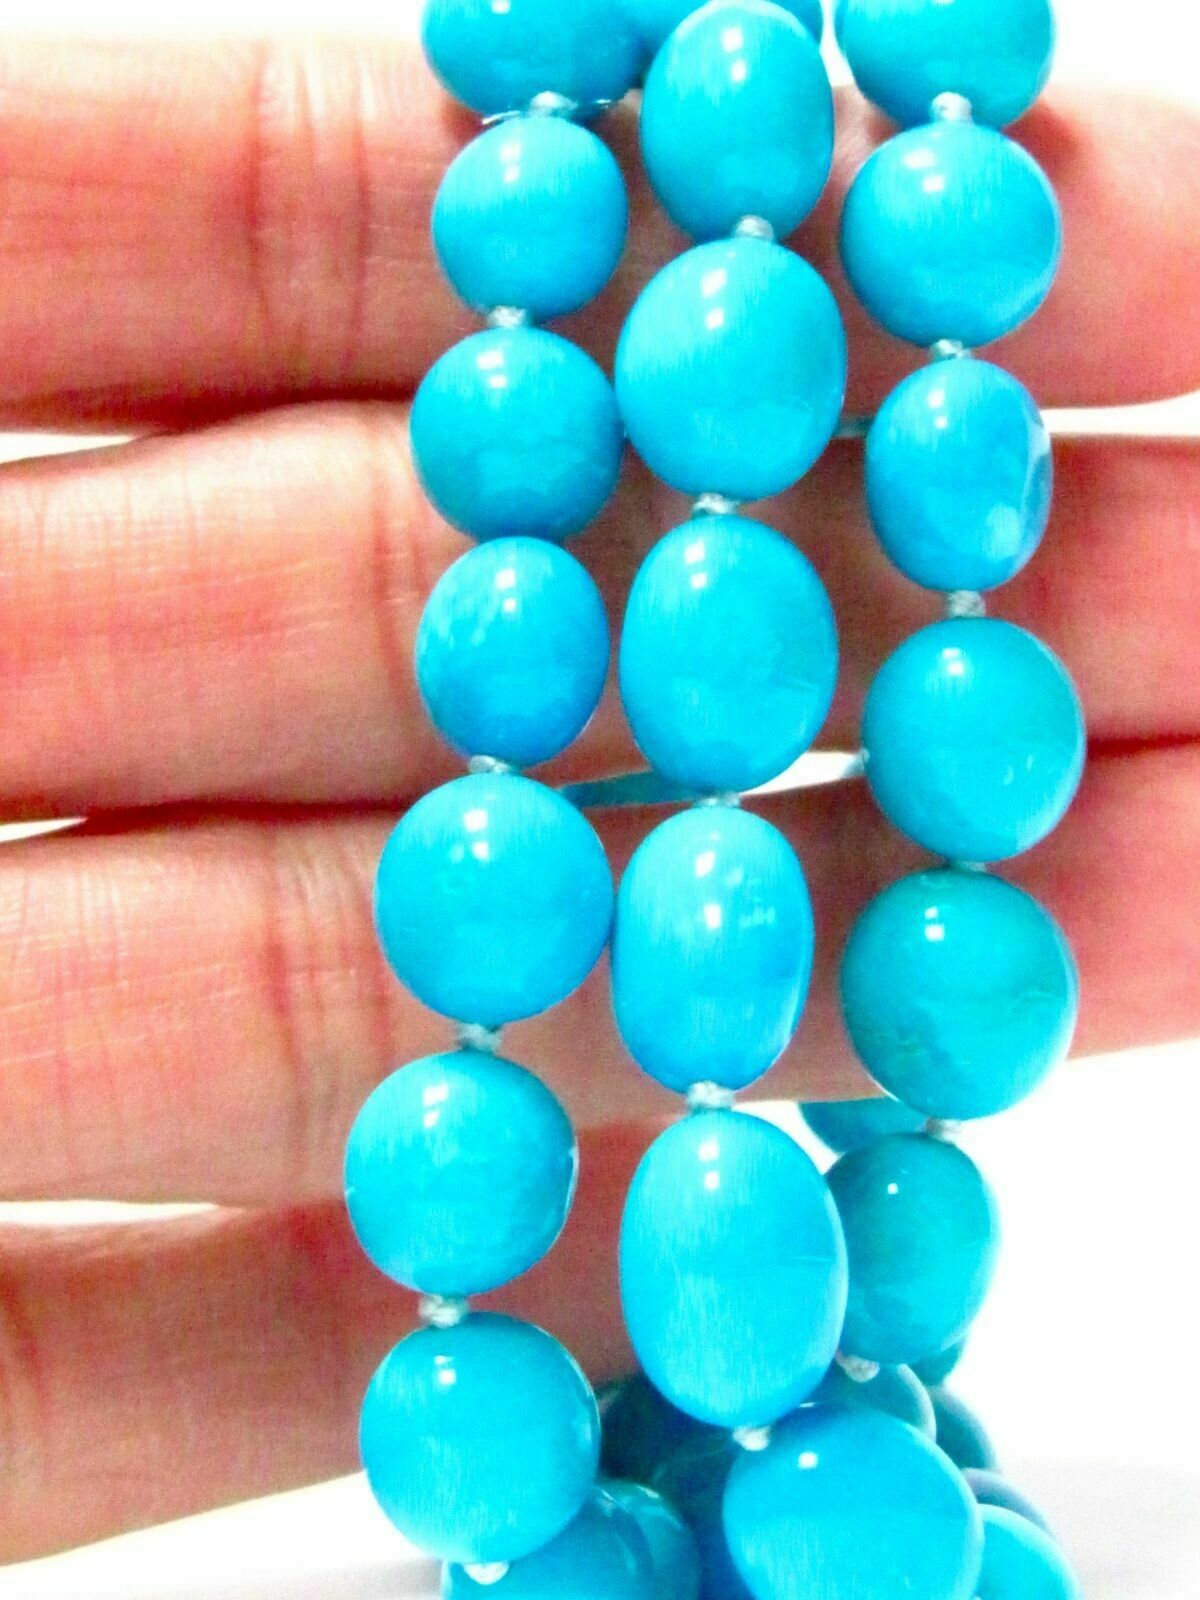 208.64 TCW Oblong/Oval Shape Persian Turquoise Bead String Necklace 20 Inches